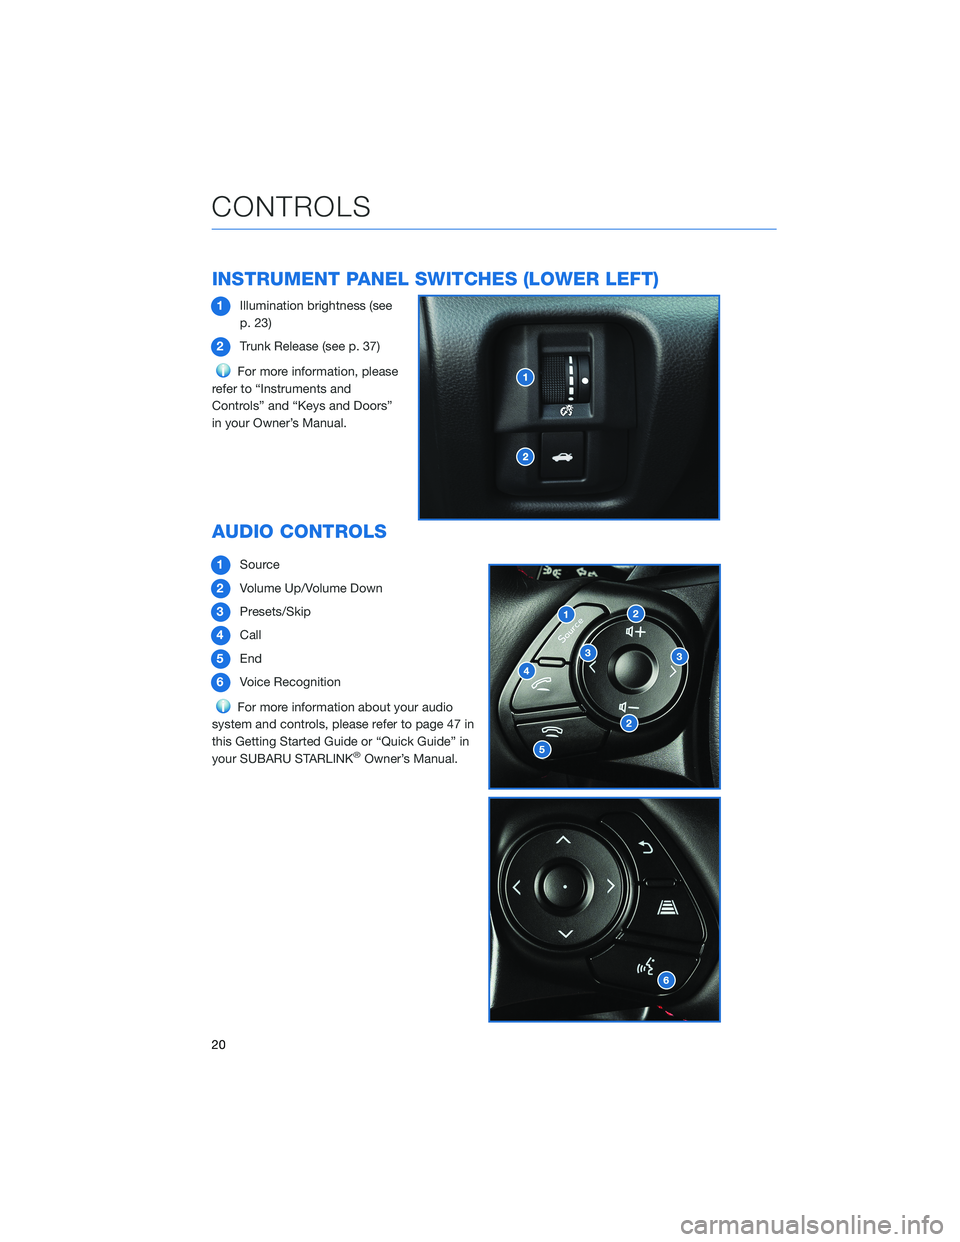 SUBARU BRZ 2022  Getting Started Guide INSTRUMENT PANEL SWITCHES (LOWER LEFT)
1Illumination brightness (see
p. 23)
2Trunk Release (see p. 37)
For more information, please
refer to “Instruments and
Controls” and “Keys and Doors”
in 